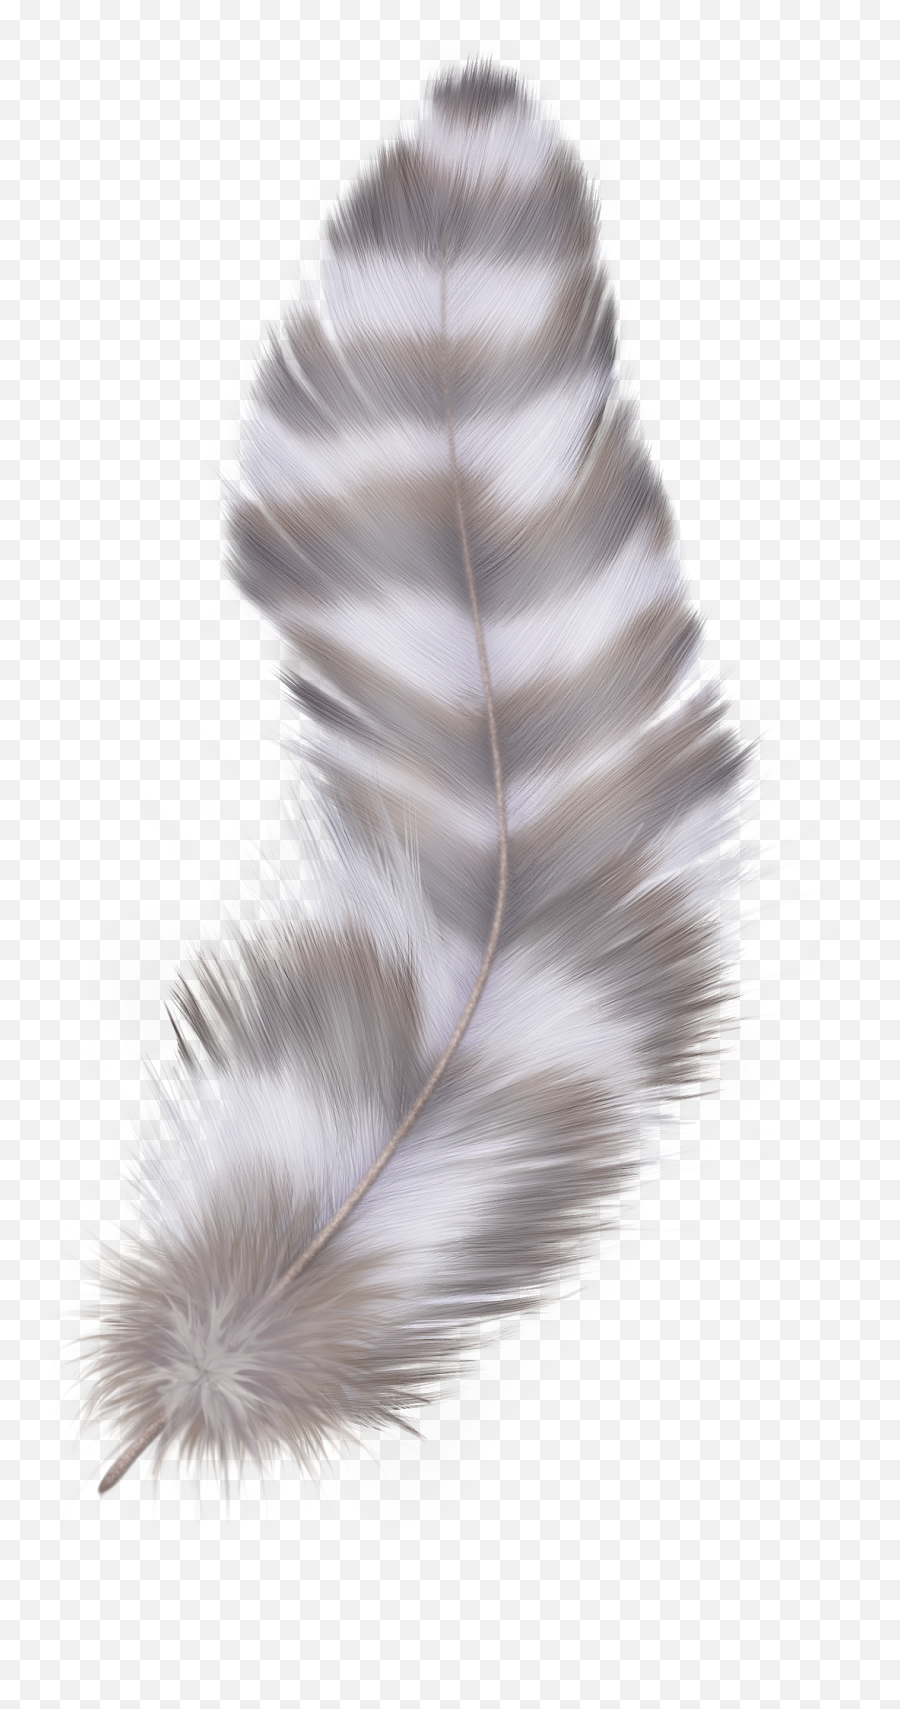 Bird Feather Asiatic Peafowl - Feather Png Png Download Feather Emoji,Feather Emoji